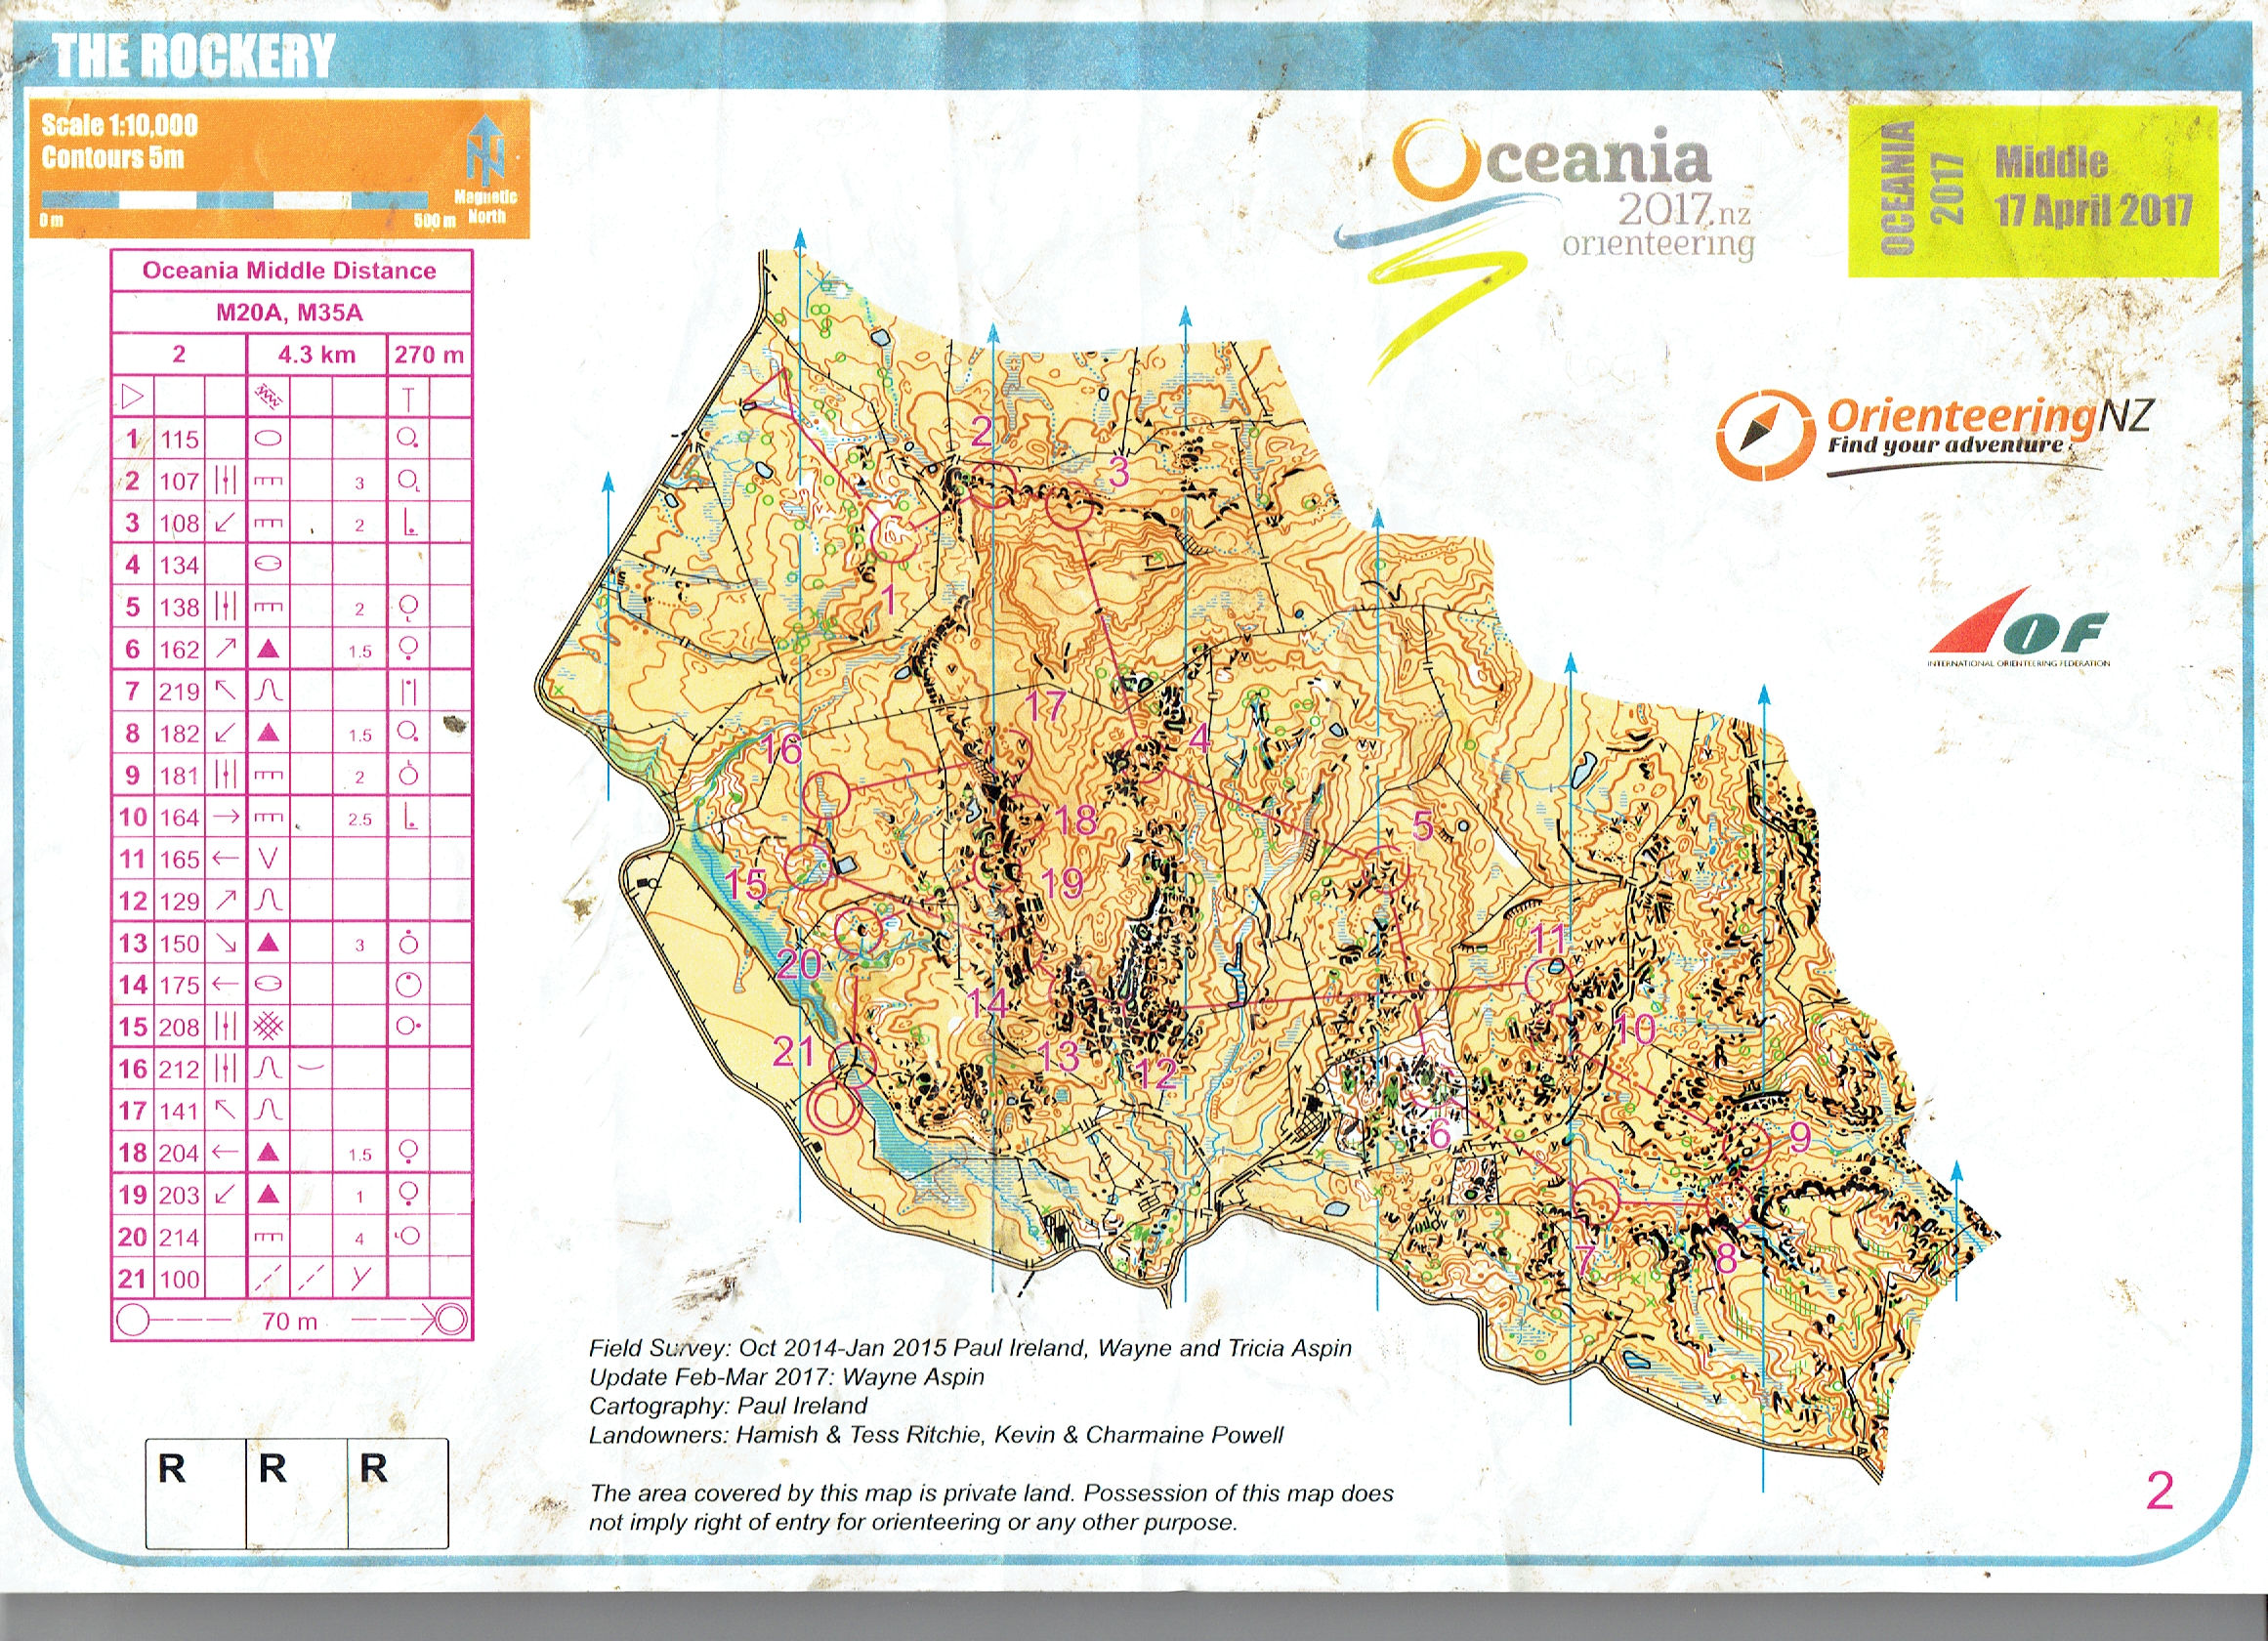 Oceania 2017 Middle (17.04.2017)